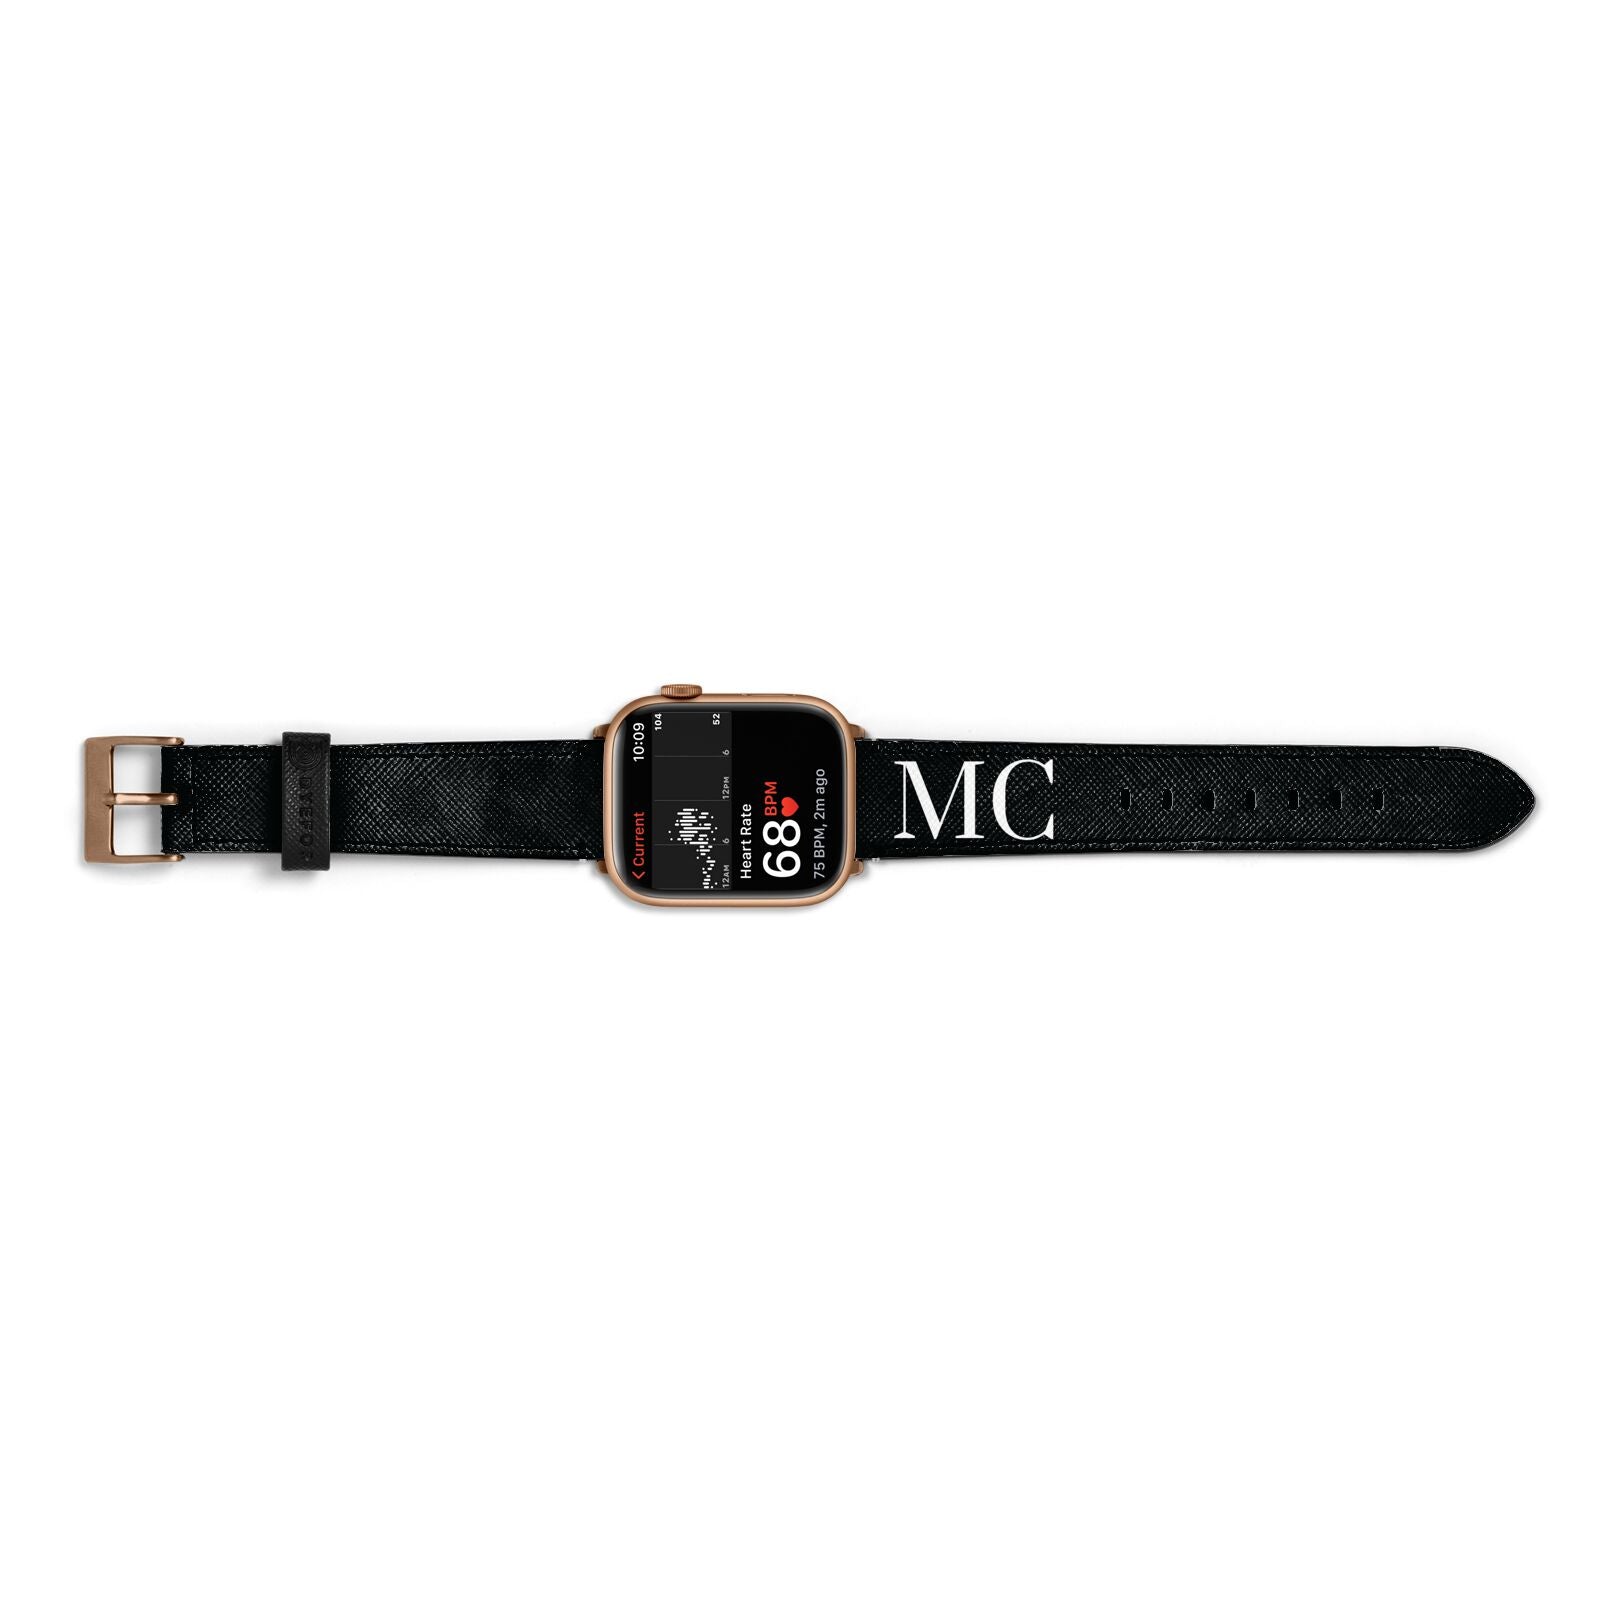 Initials Personalised 1 Apple Watch Strap Size 38mm Landscape Image Gold Hardware